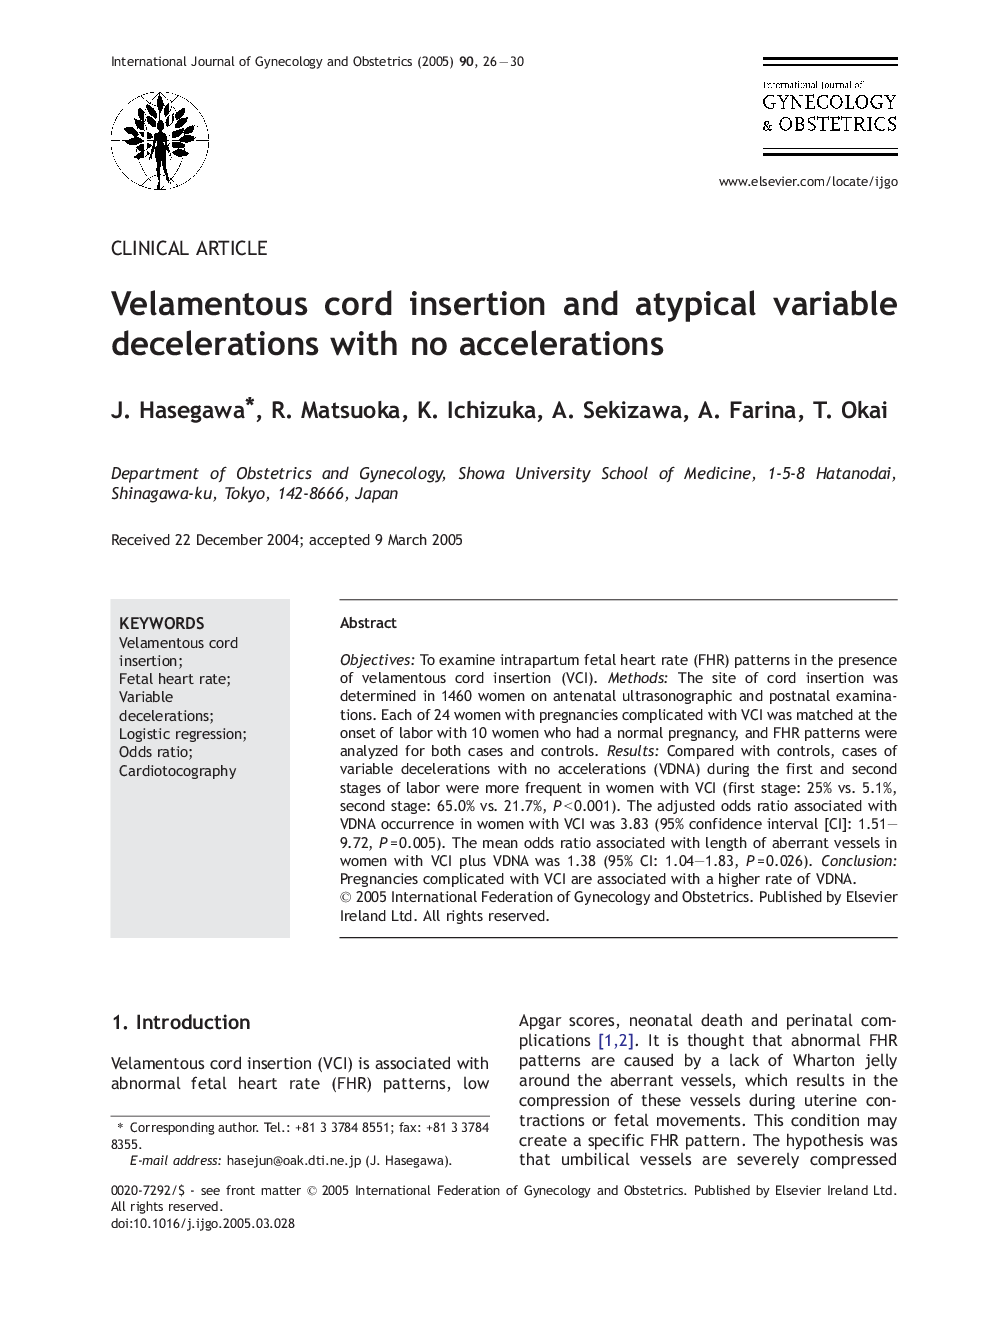 Velamentous cord insertion and atypical variable decelerations with no accelerations